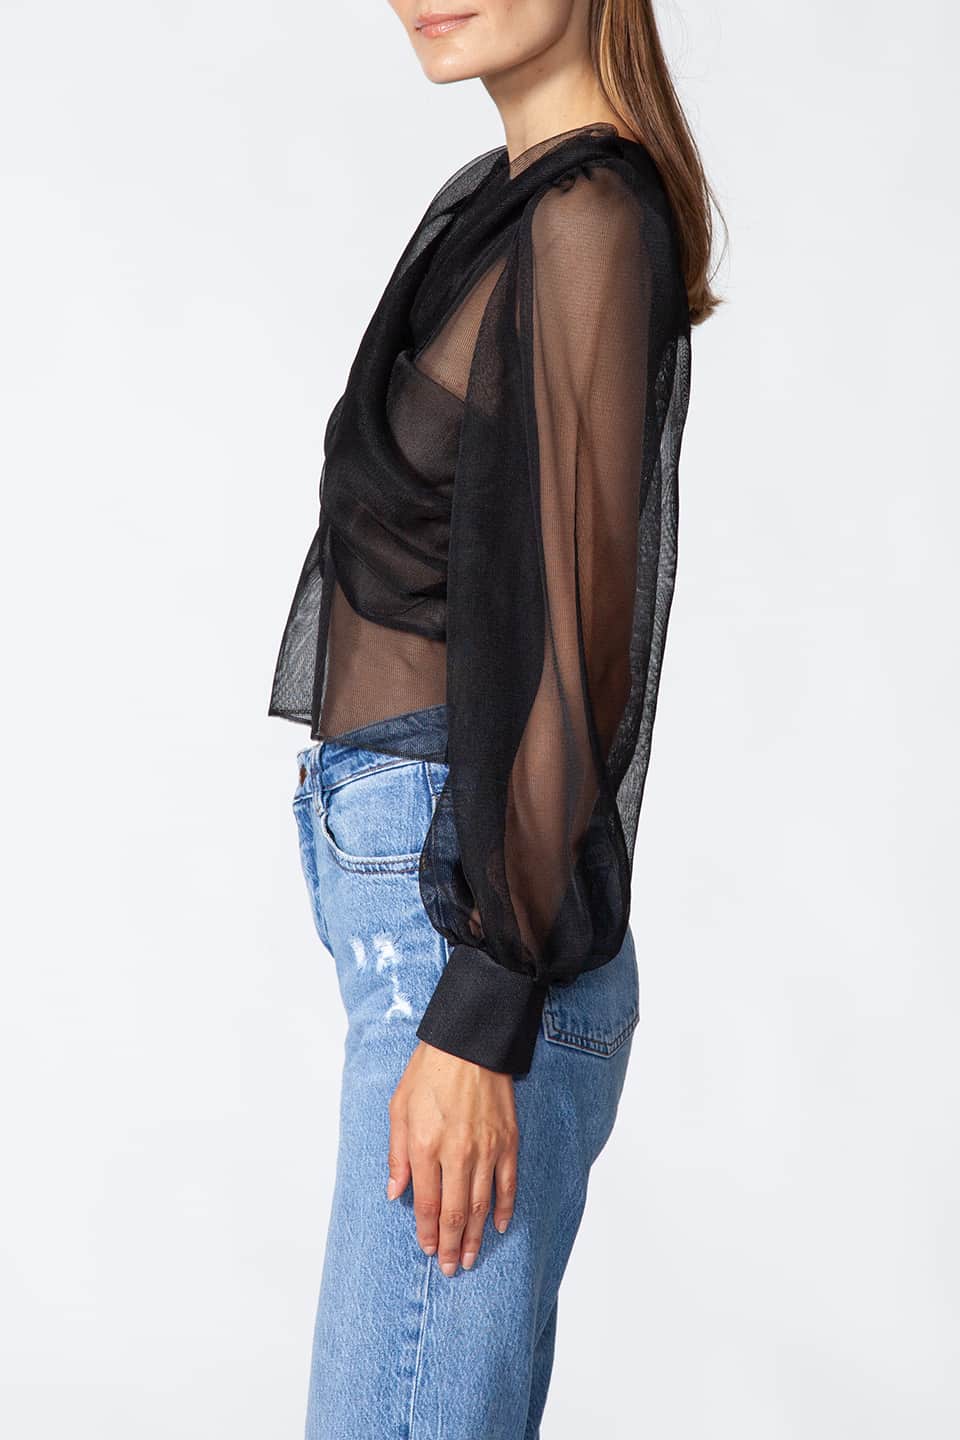 Thumbnail for Product gallery 4, Long sleeve top in black color with puffy sleeves, from Kukhareva London Fashion Stylist is wore by model posing on the left side